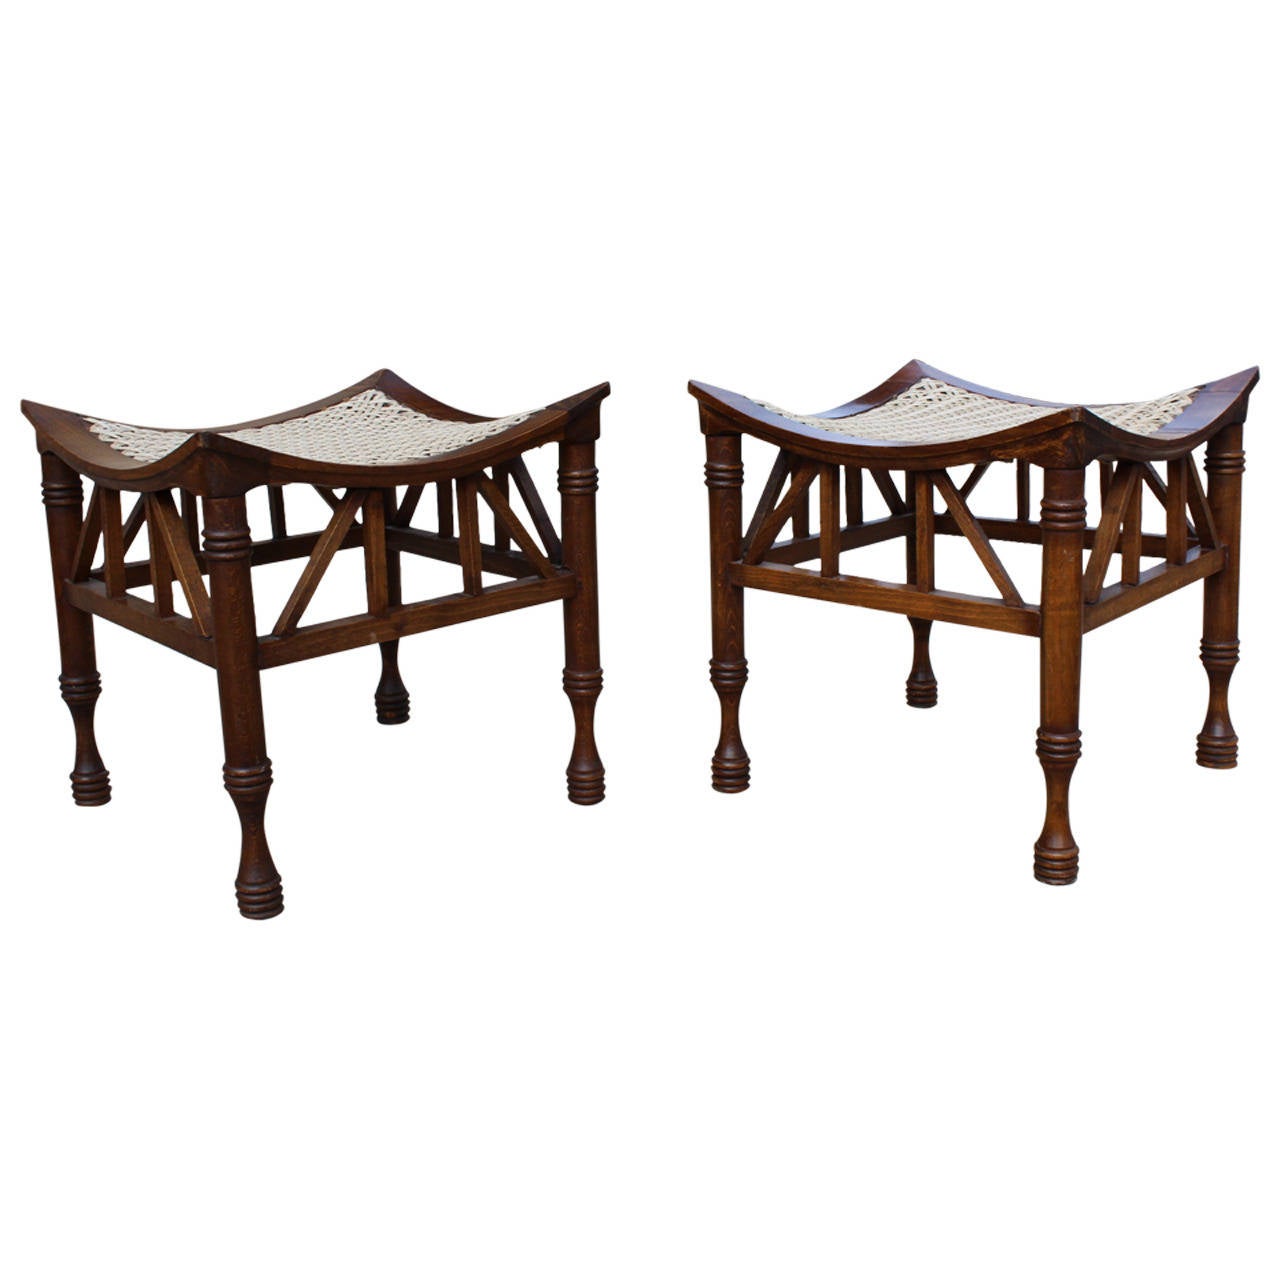 Pair of 19th Century Thebes Stools, Attributed to Liberty For Sale